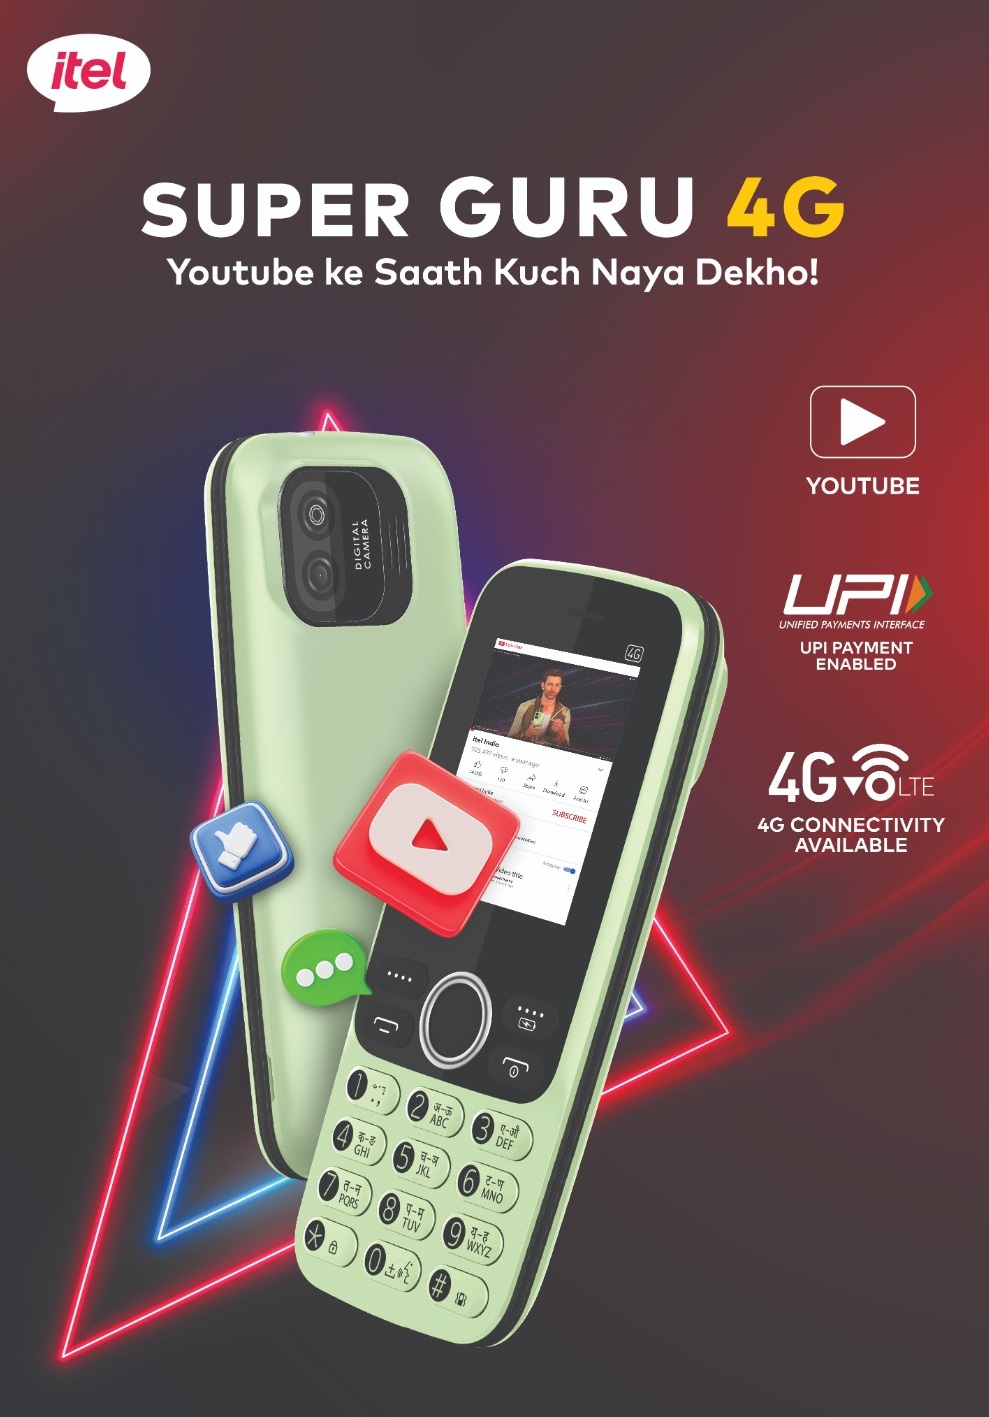 itel Launches Super Guru 4G with YouTube and UPI Features